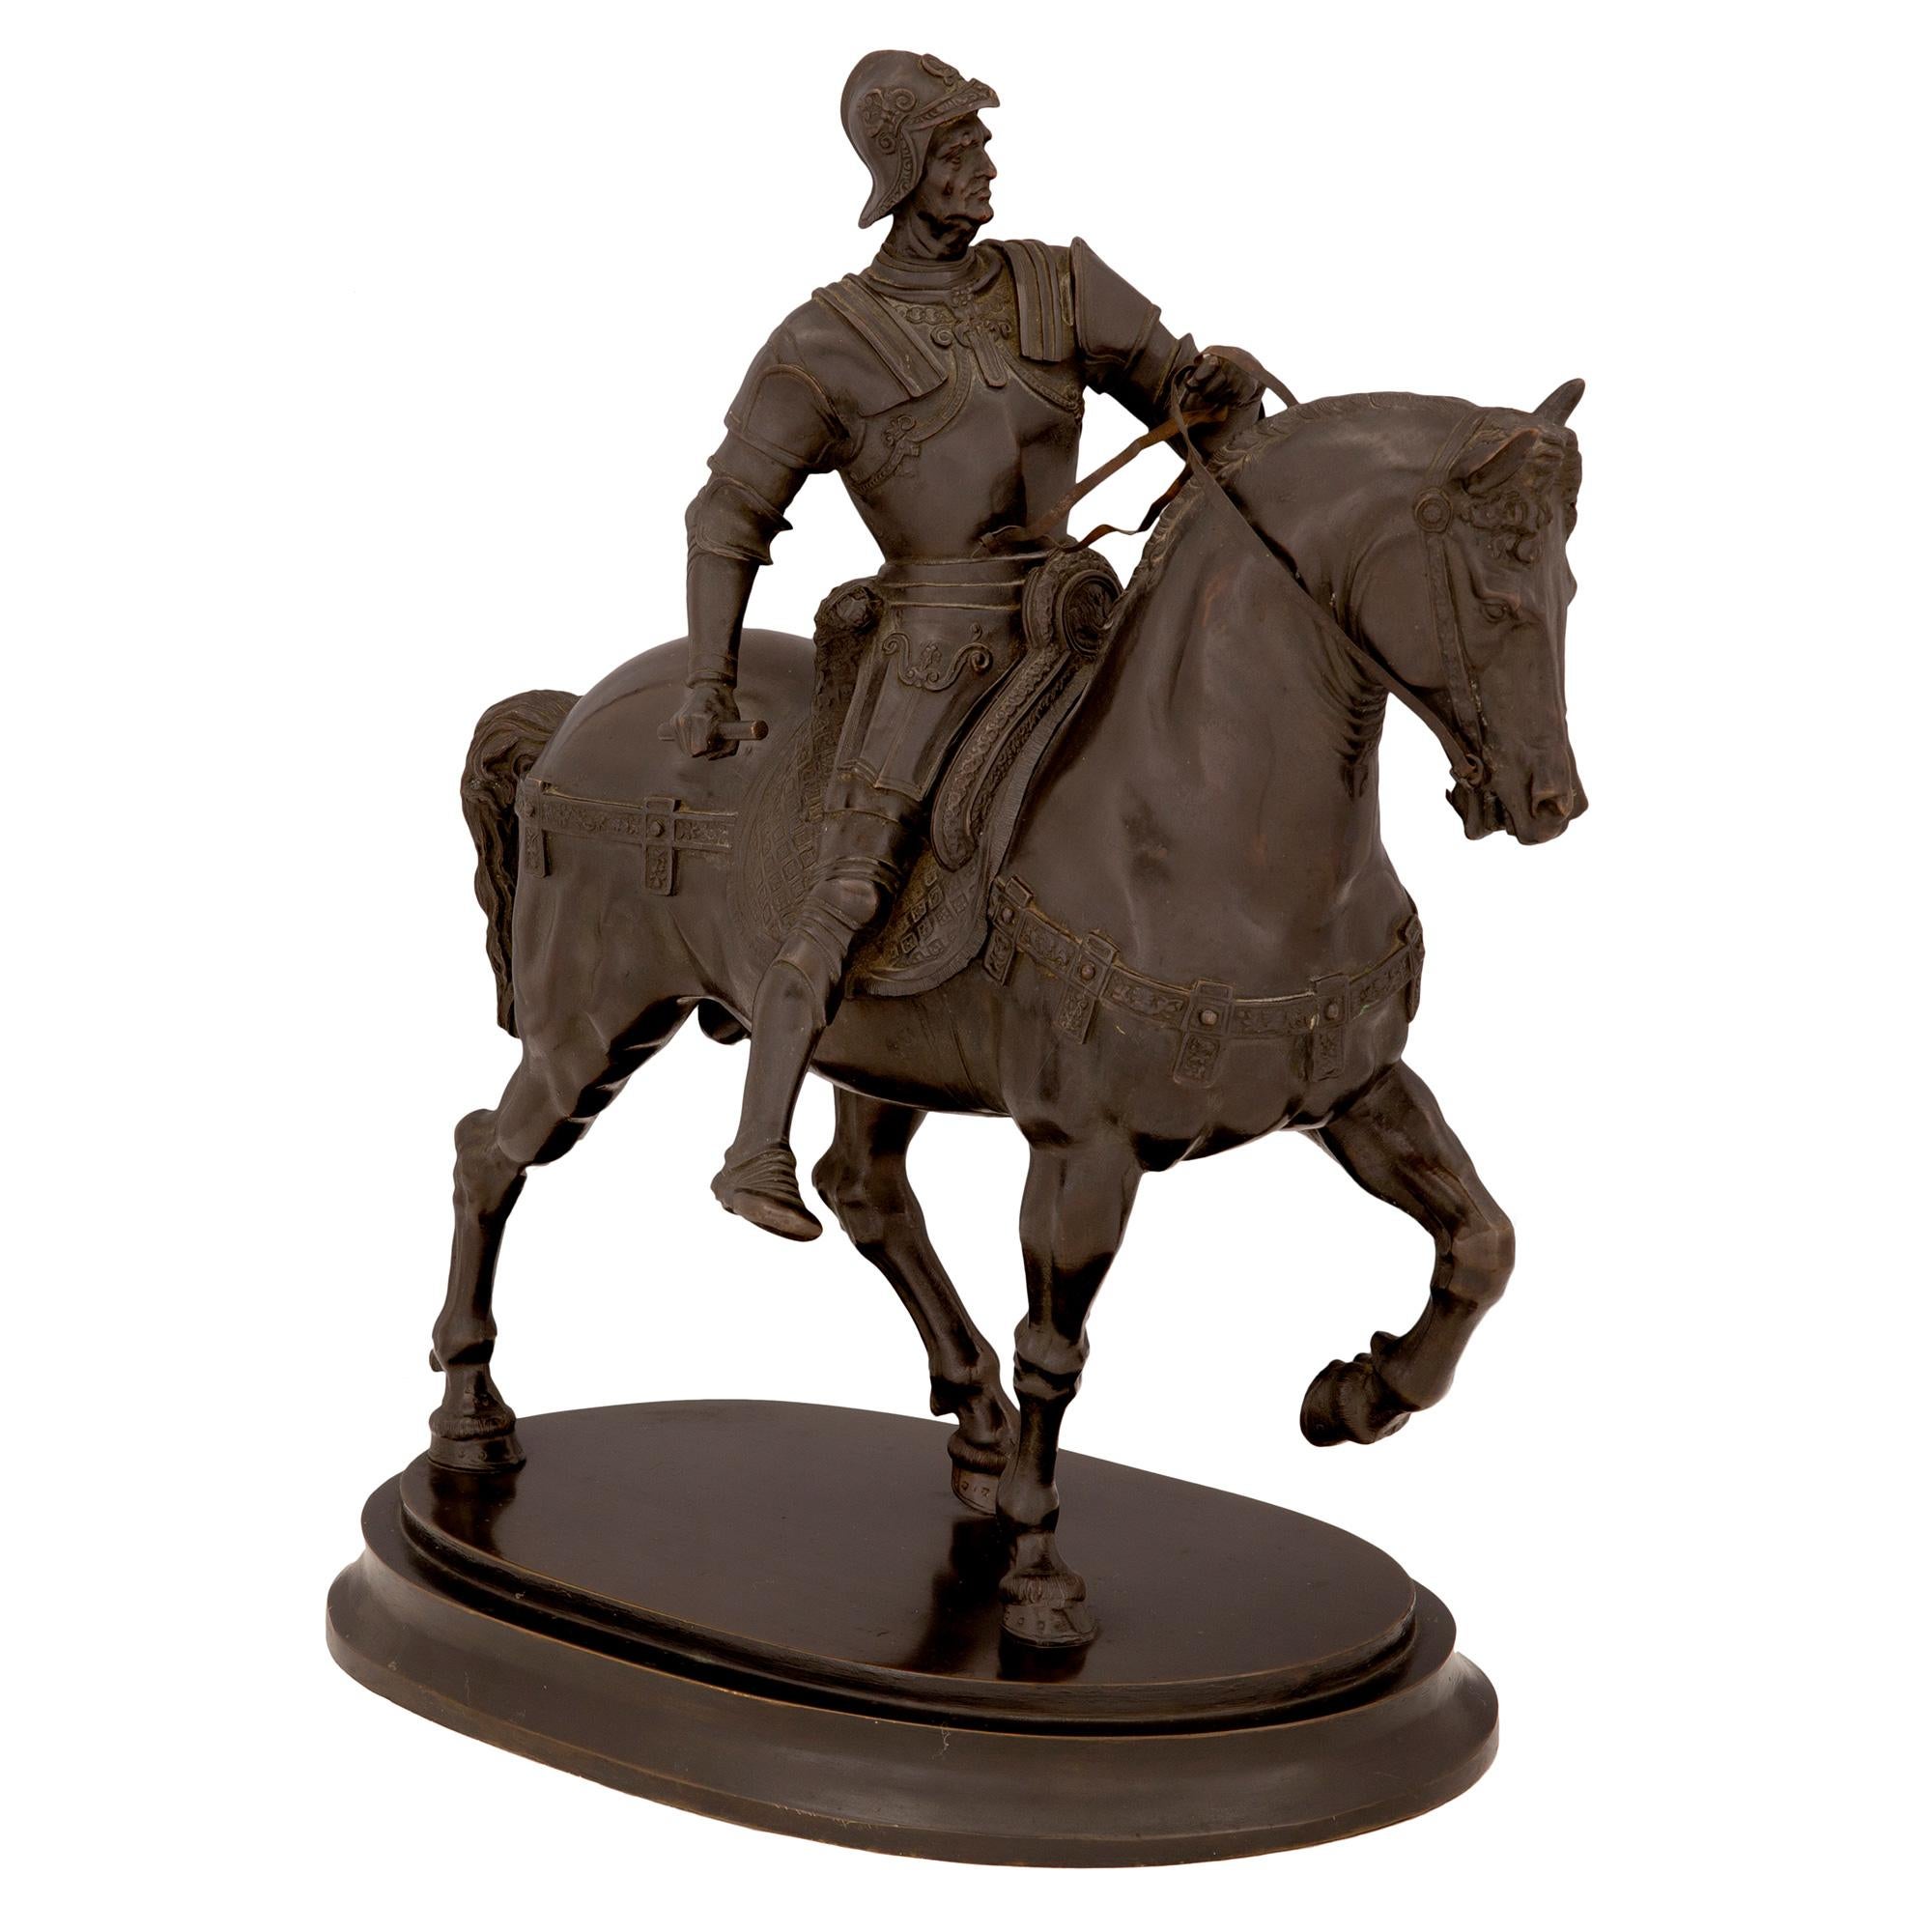 An exceptional and high quality Italian 19th century patinated bronze statue of a nobleman 'Condottiero Bartolomeo Colleoni' on his horse. The statue is raised by an elegant oval base with a fine mottled border. Above is Condottiero Colleoni,